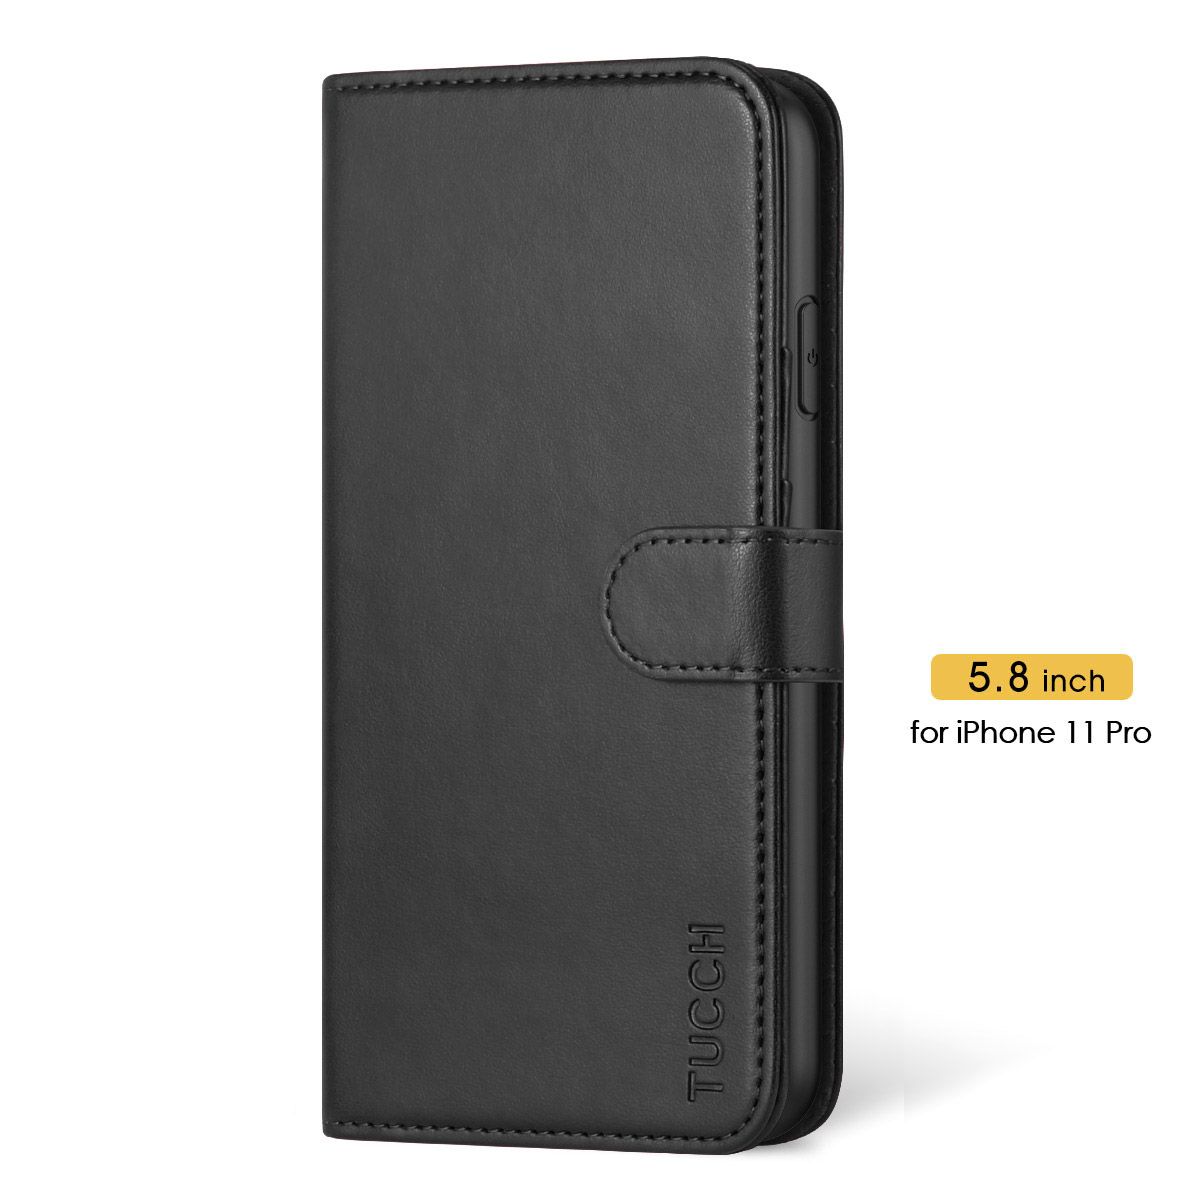 Leather Cover Compatible with iPhone 11 Black Wallet Case for iPhone 11 